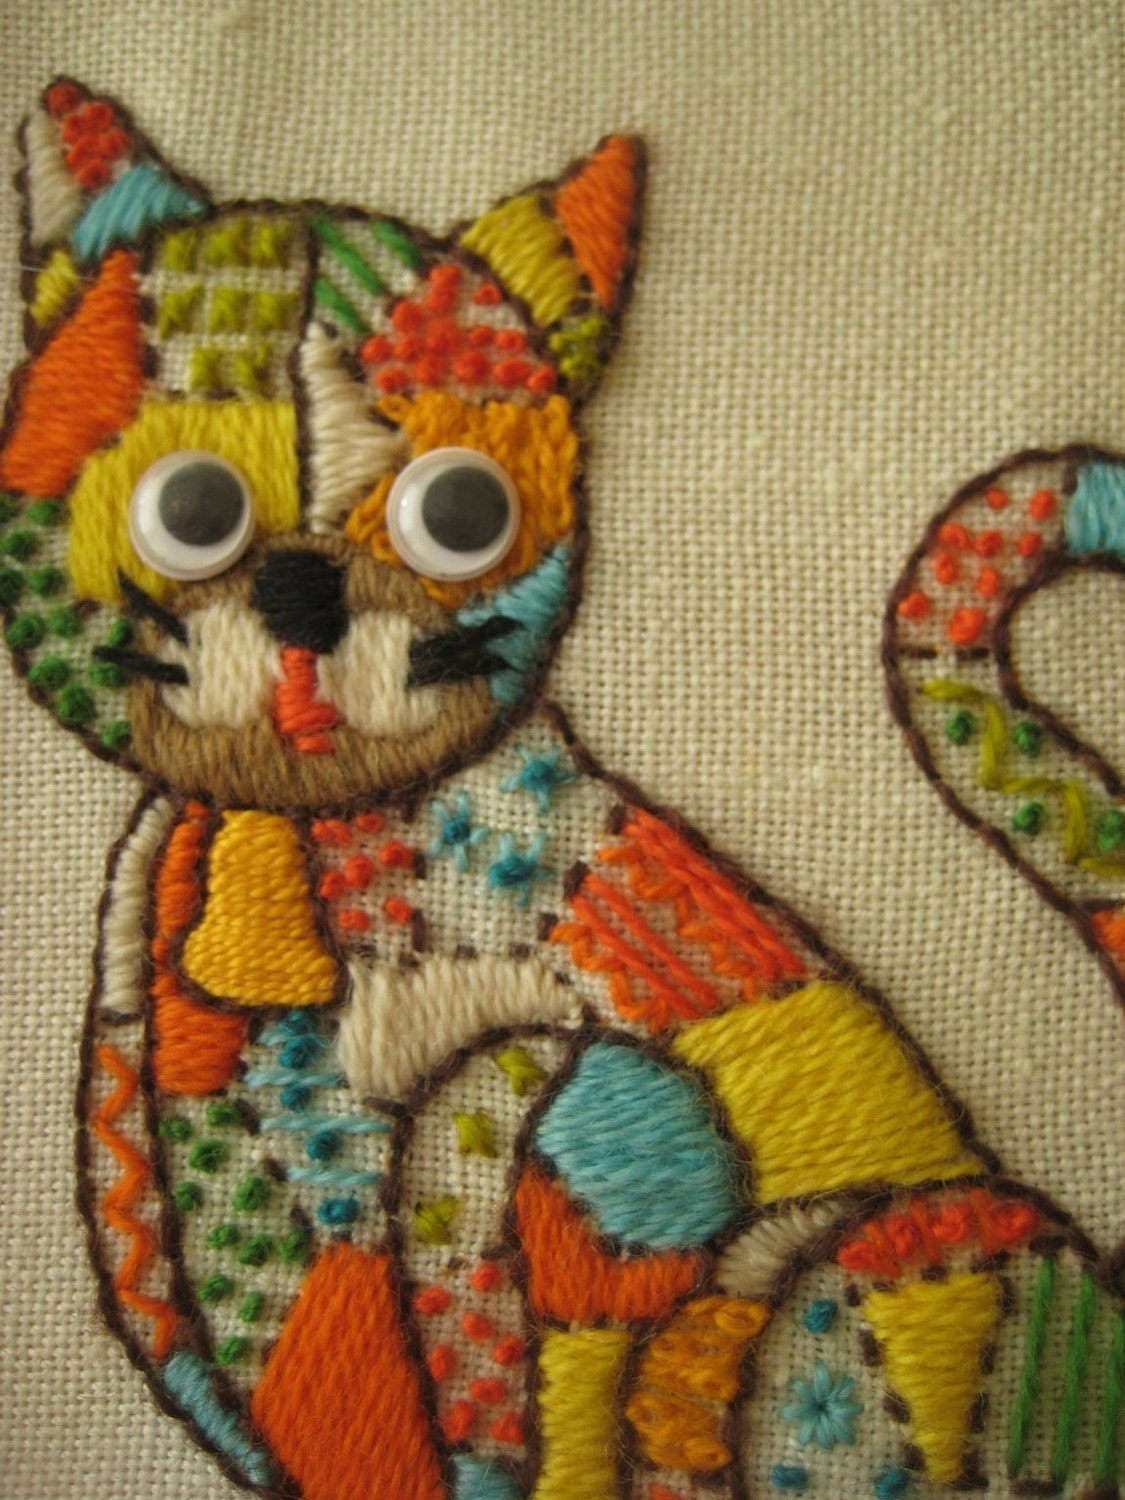 Vintage Multicolored Crewel/Embroidered Cat, with Googly Eyes, Framed